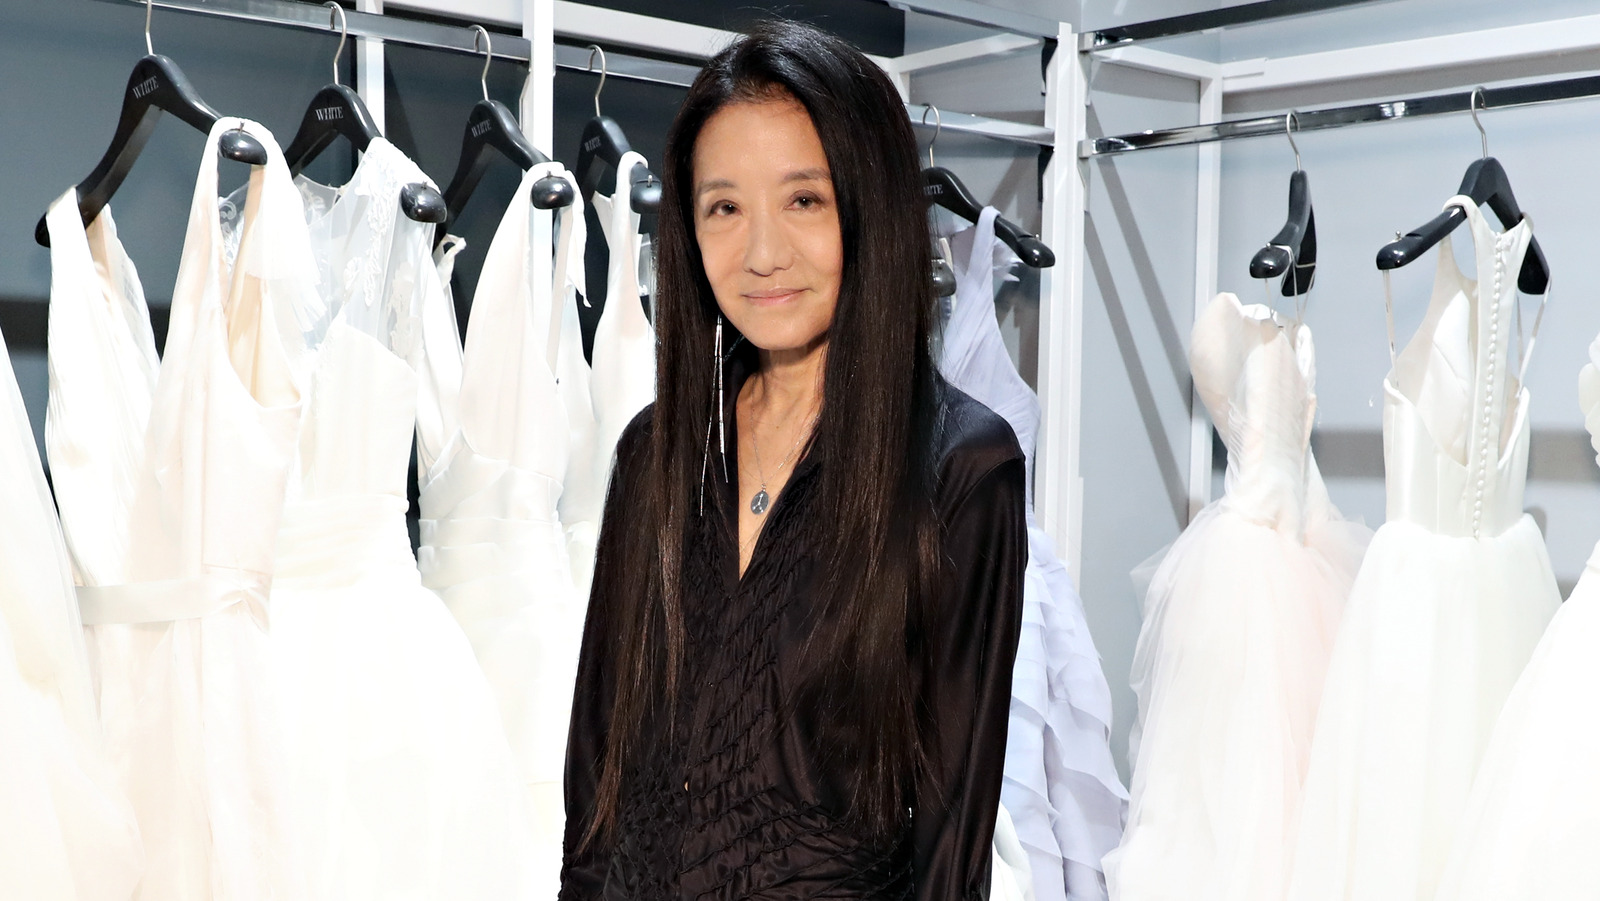 Why the Louis Vuitton Bridal Salon at The Vogue Wedding Show is a